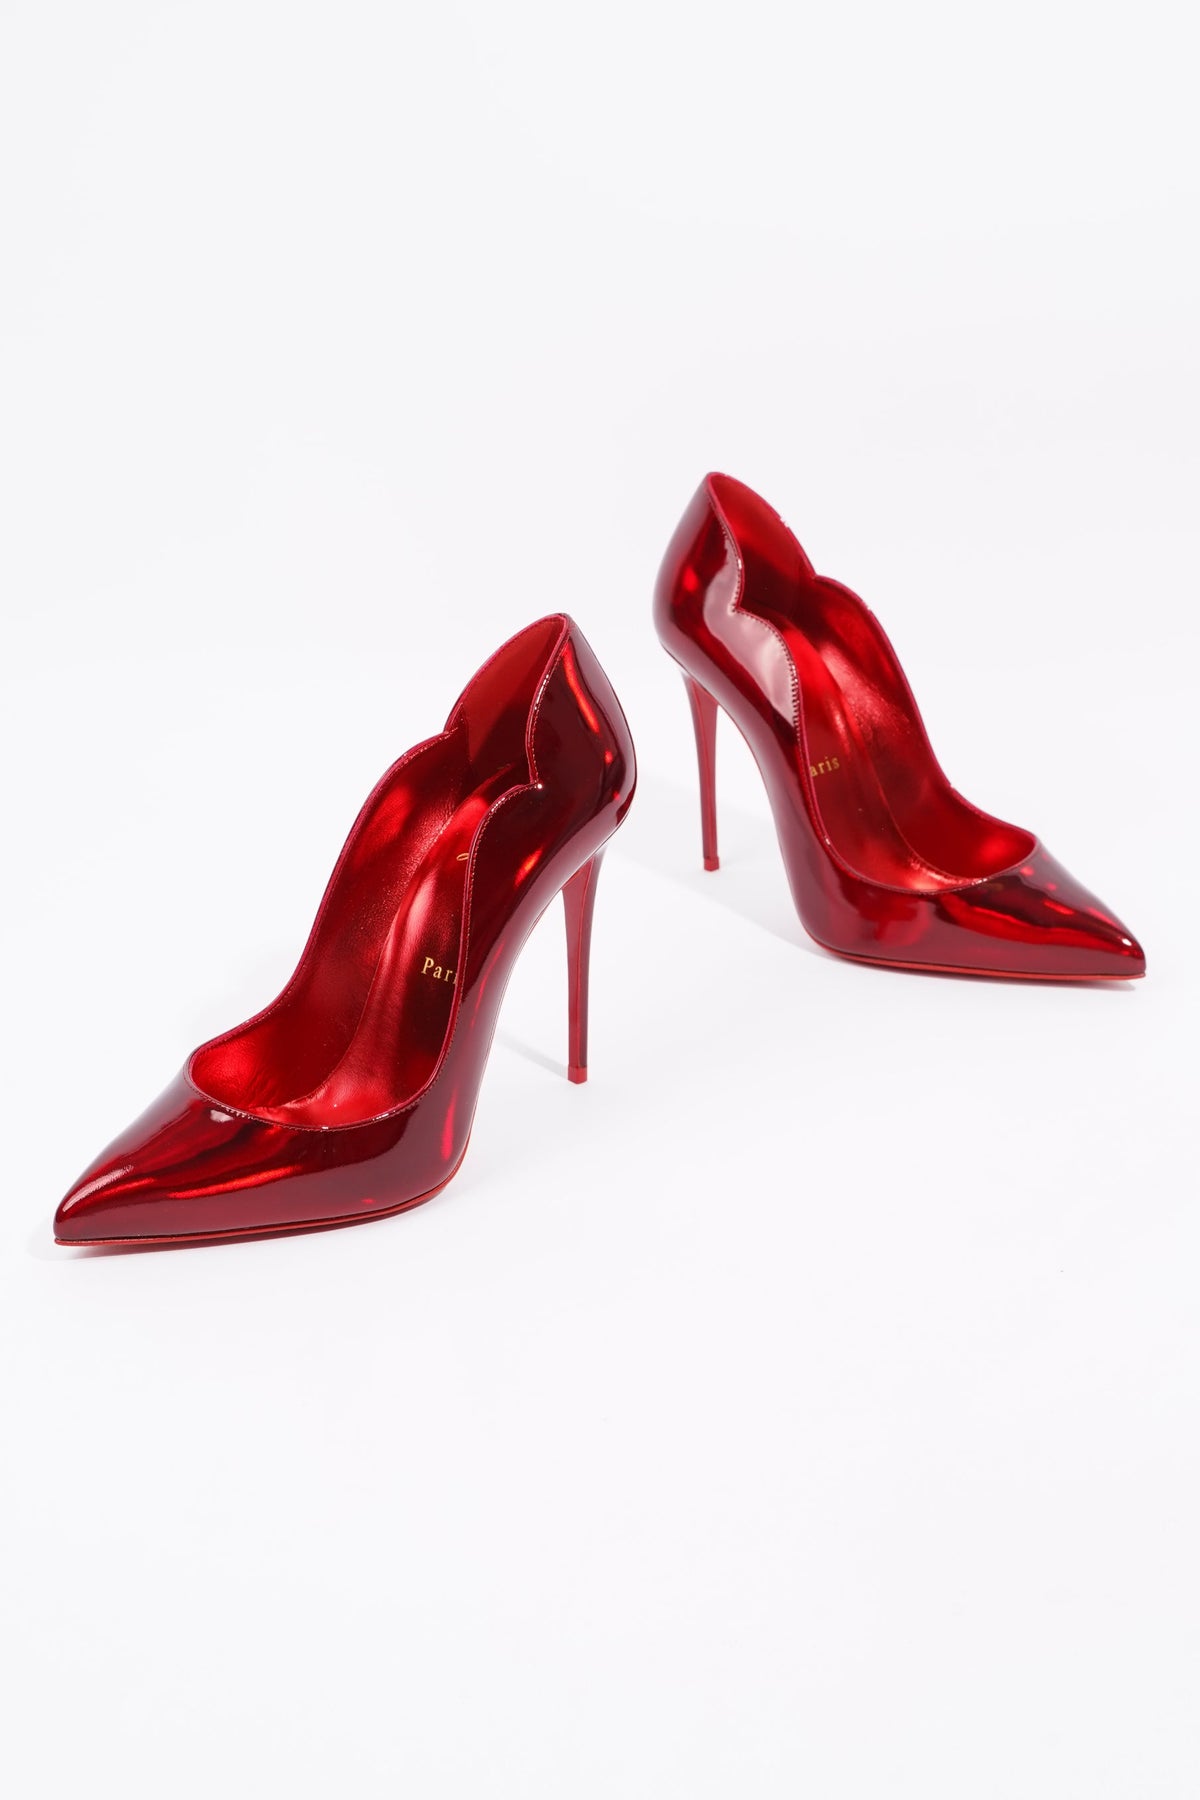 Christian Louboutin, Shoes, Authentic Psychic Red Louboutin Hot Chick 0  Mm New In Box Size 1011 415